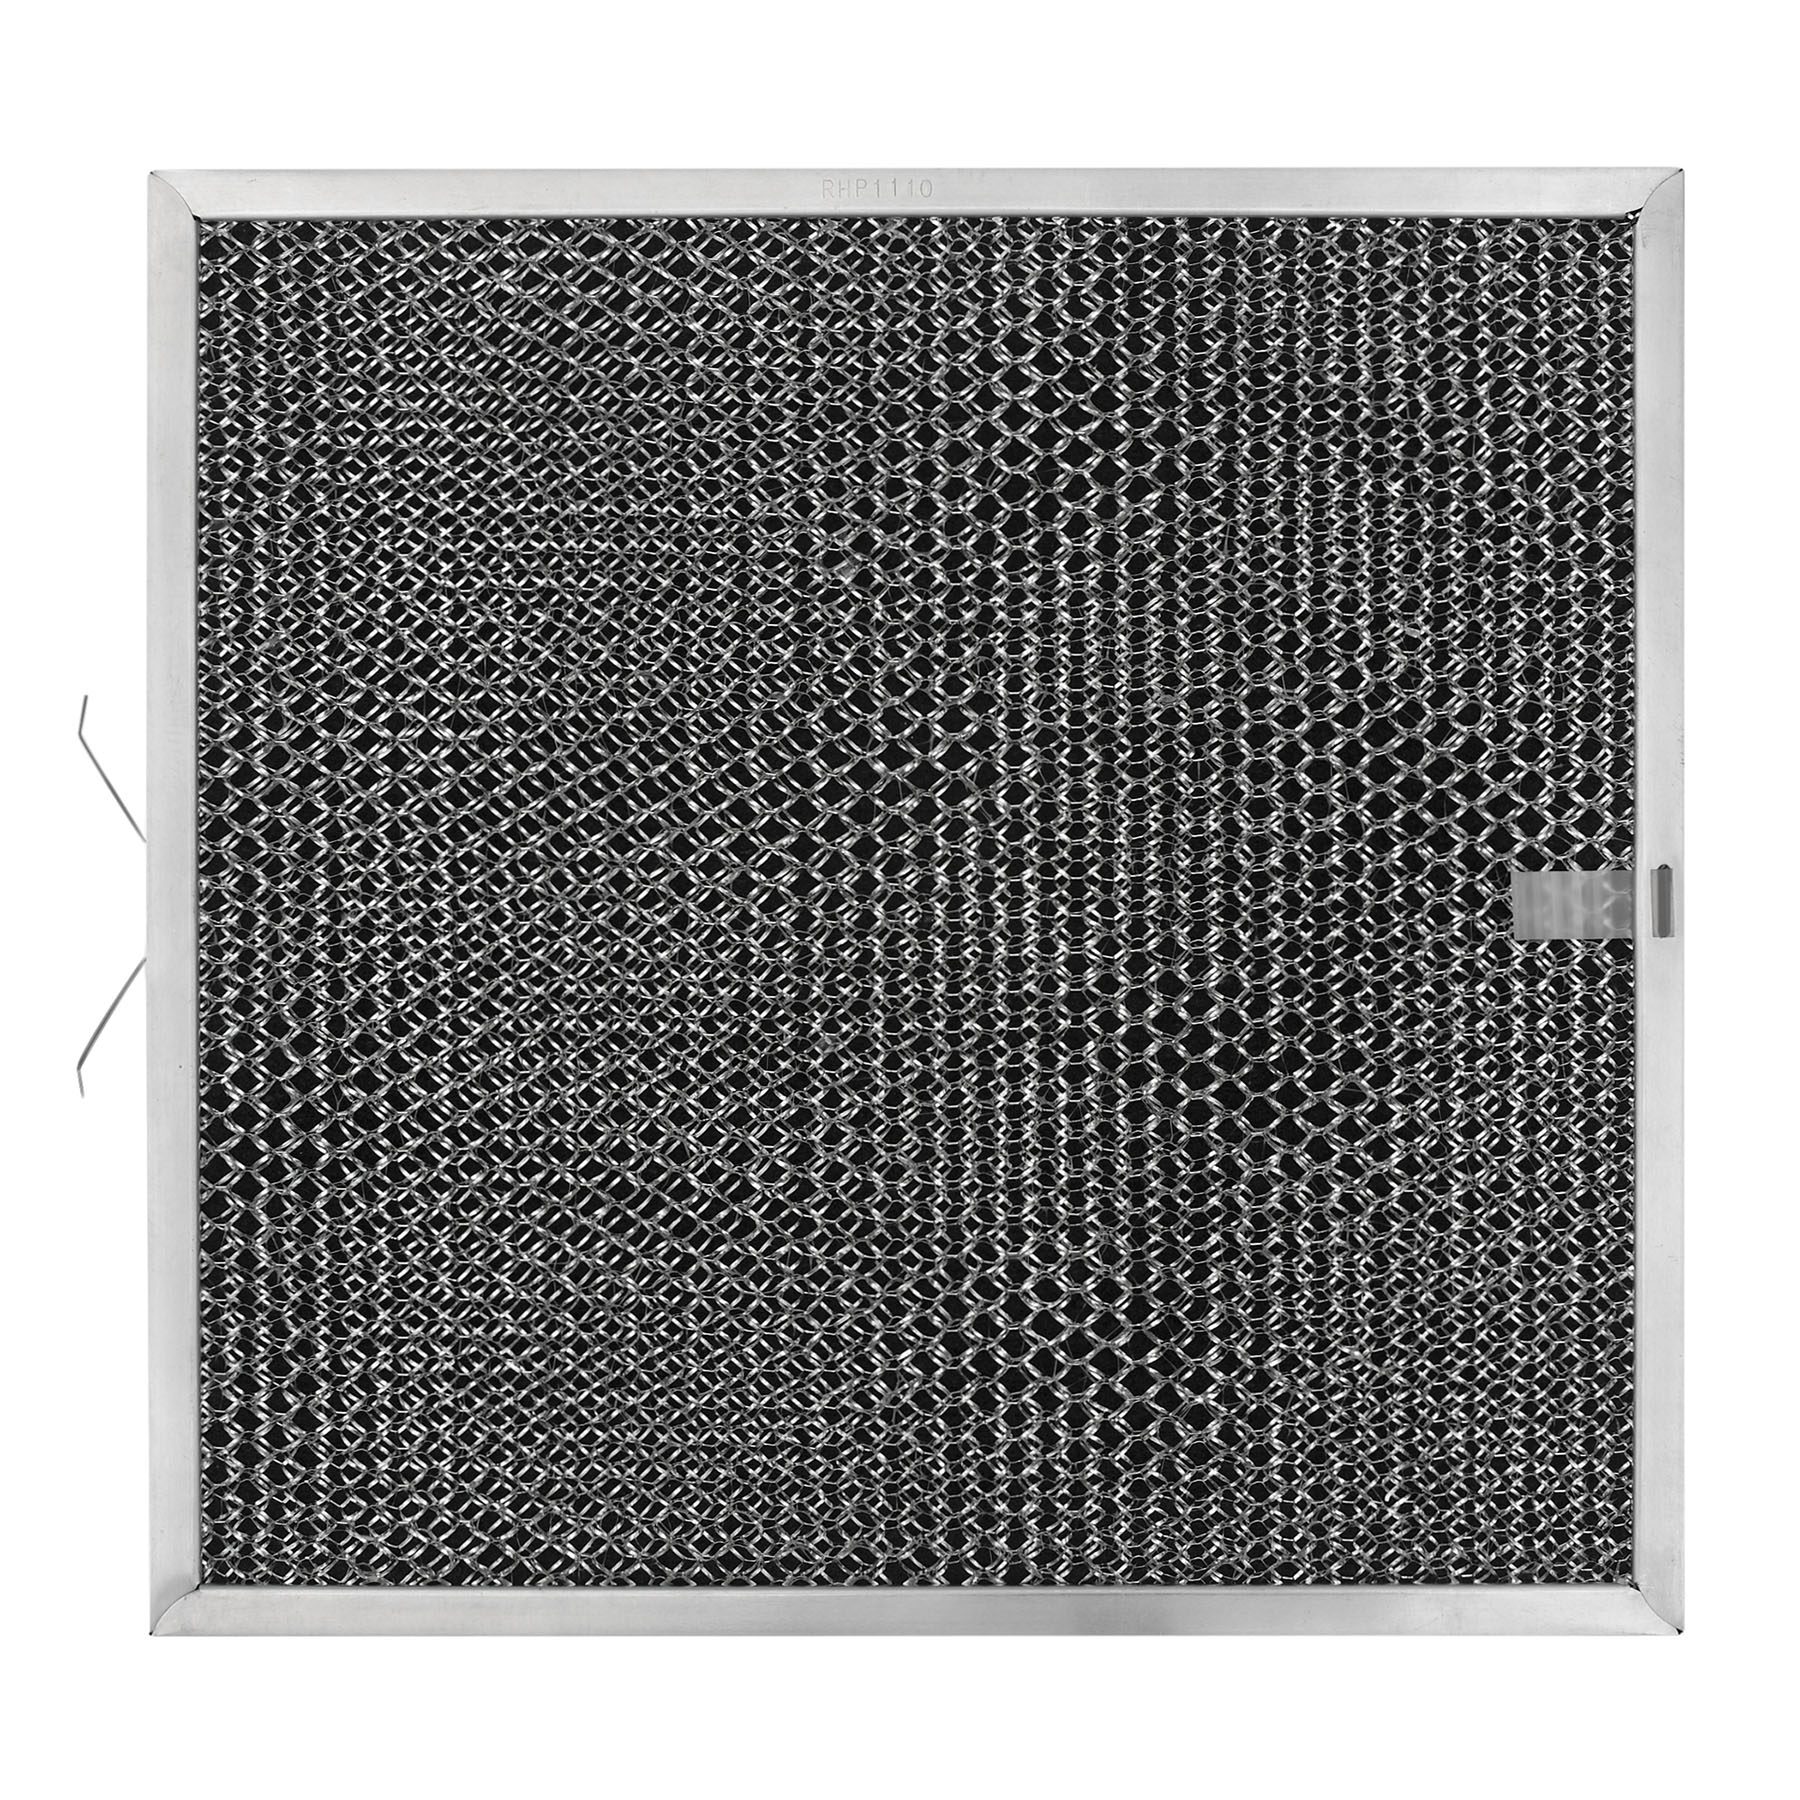 RHF0642 Aluminum Grease Filter for Ducted Range Hood or Microwave Oven |  with Pull Tab